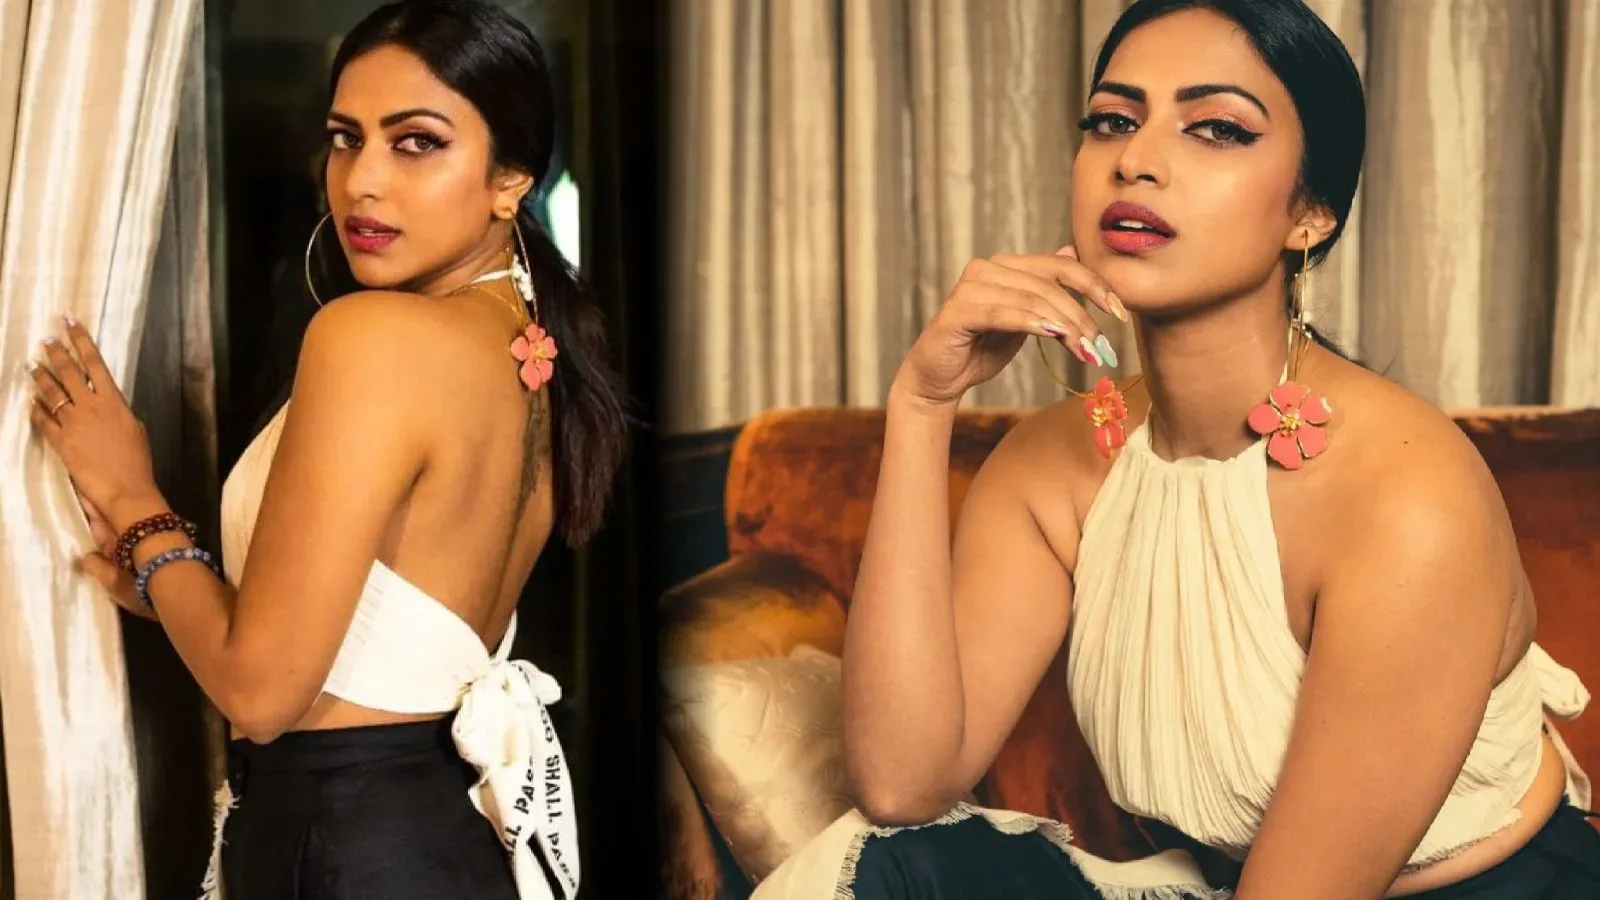 Hot Stills of Amala Paul in the modern outfit as she looks stylish